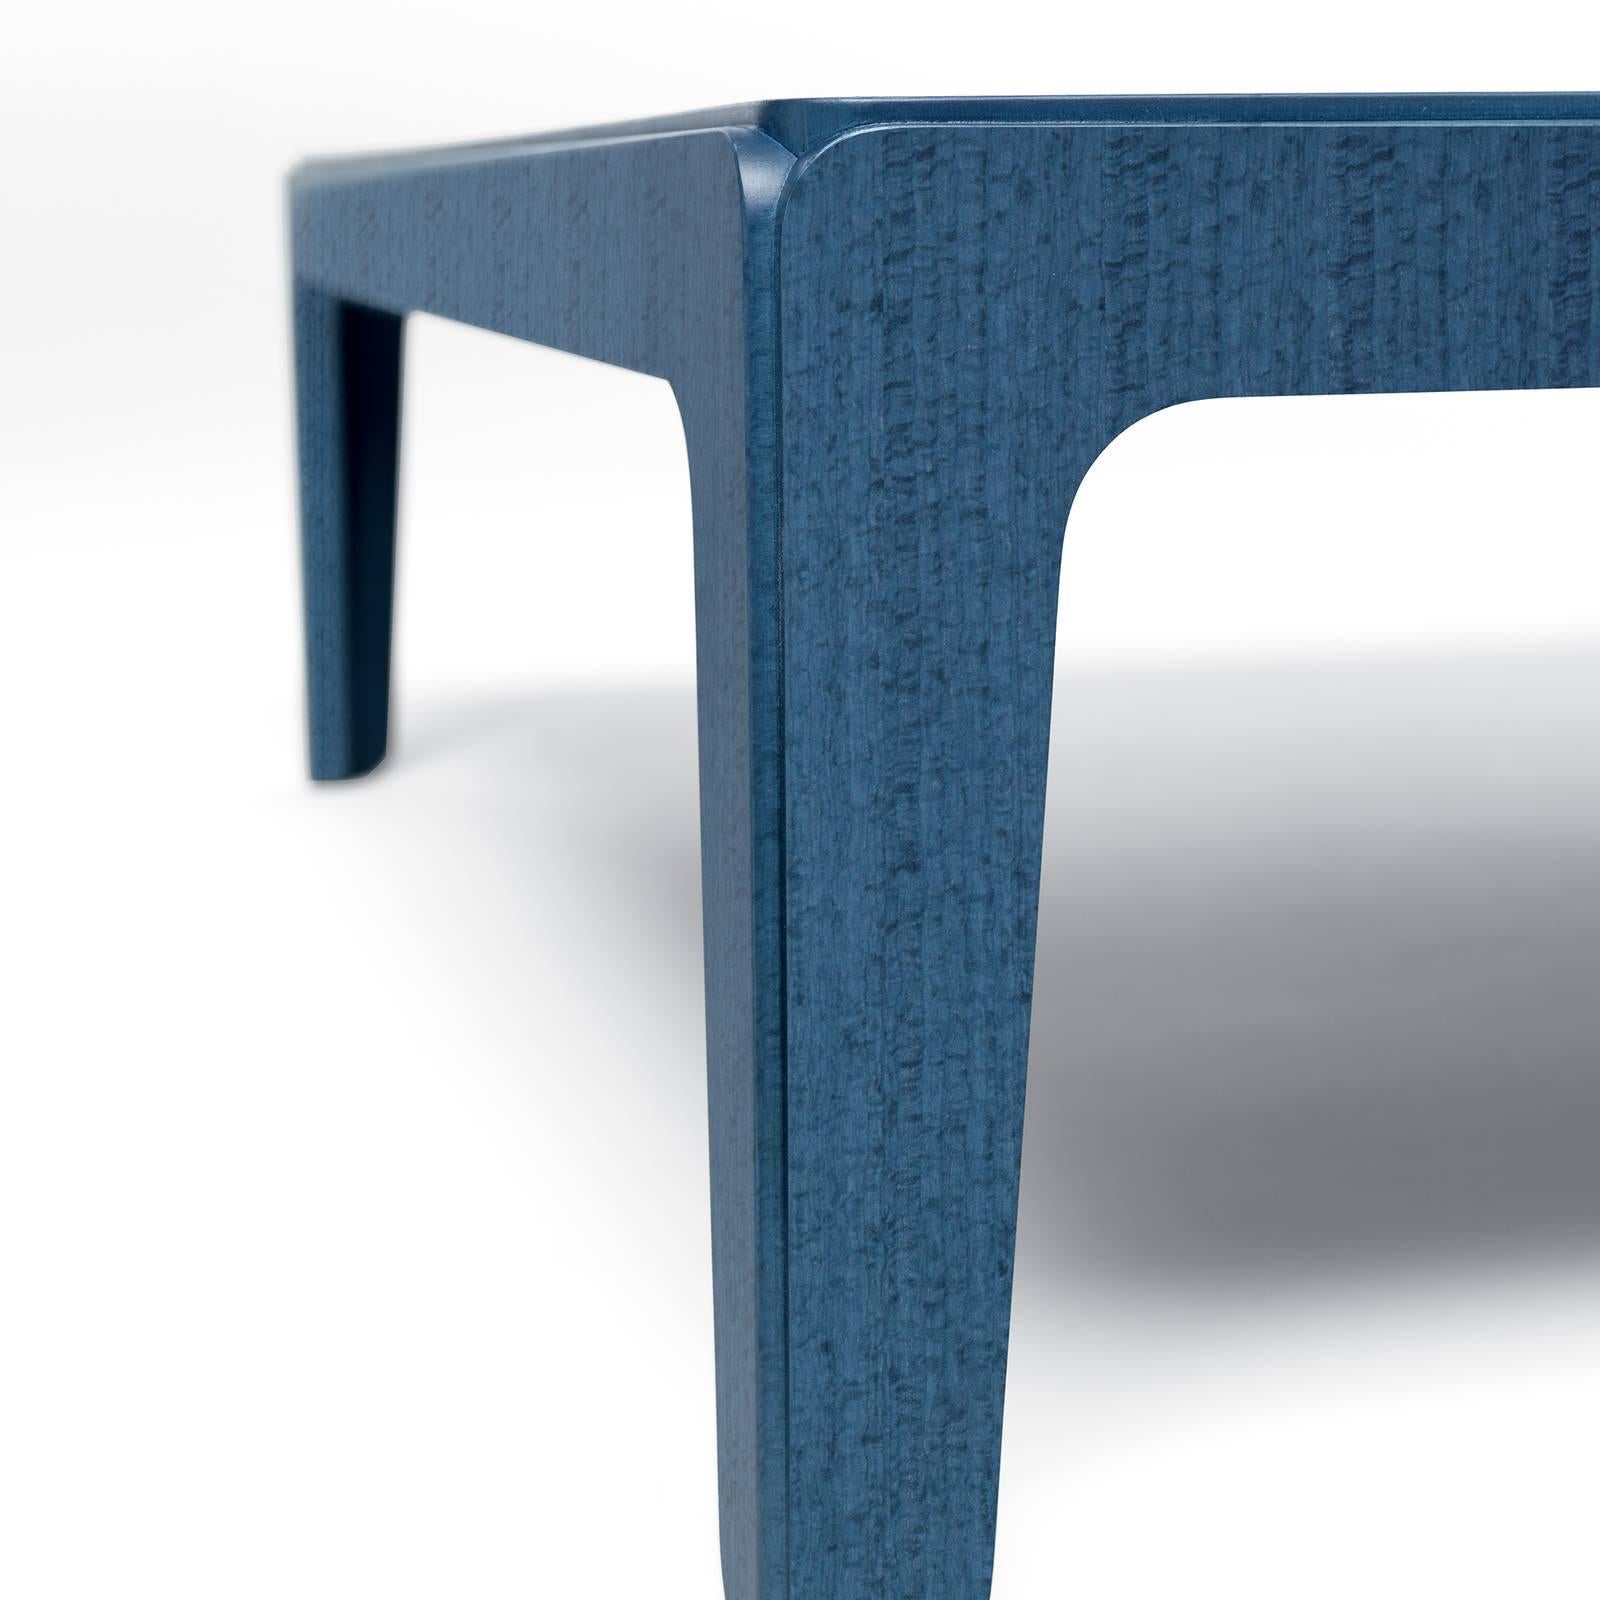 Ideal as a bedside table or next to a sofa for resting books or drinks, this side table is also a modern and stylish accent piece to display in an entryway or office. The geometric square frame is crafted of MDF finished with blue-stained eucalyptus